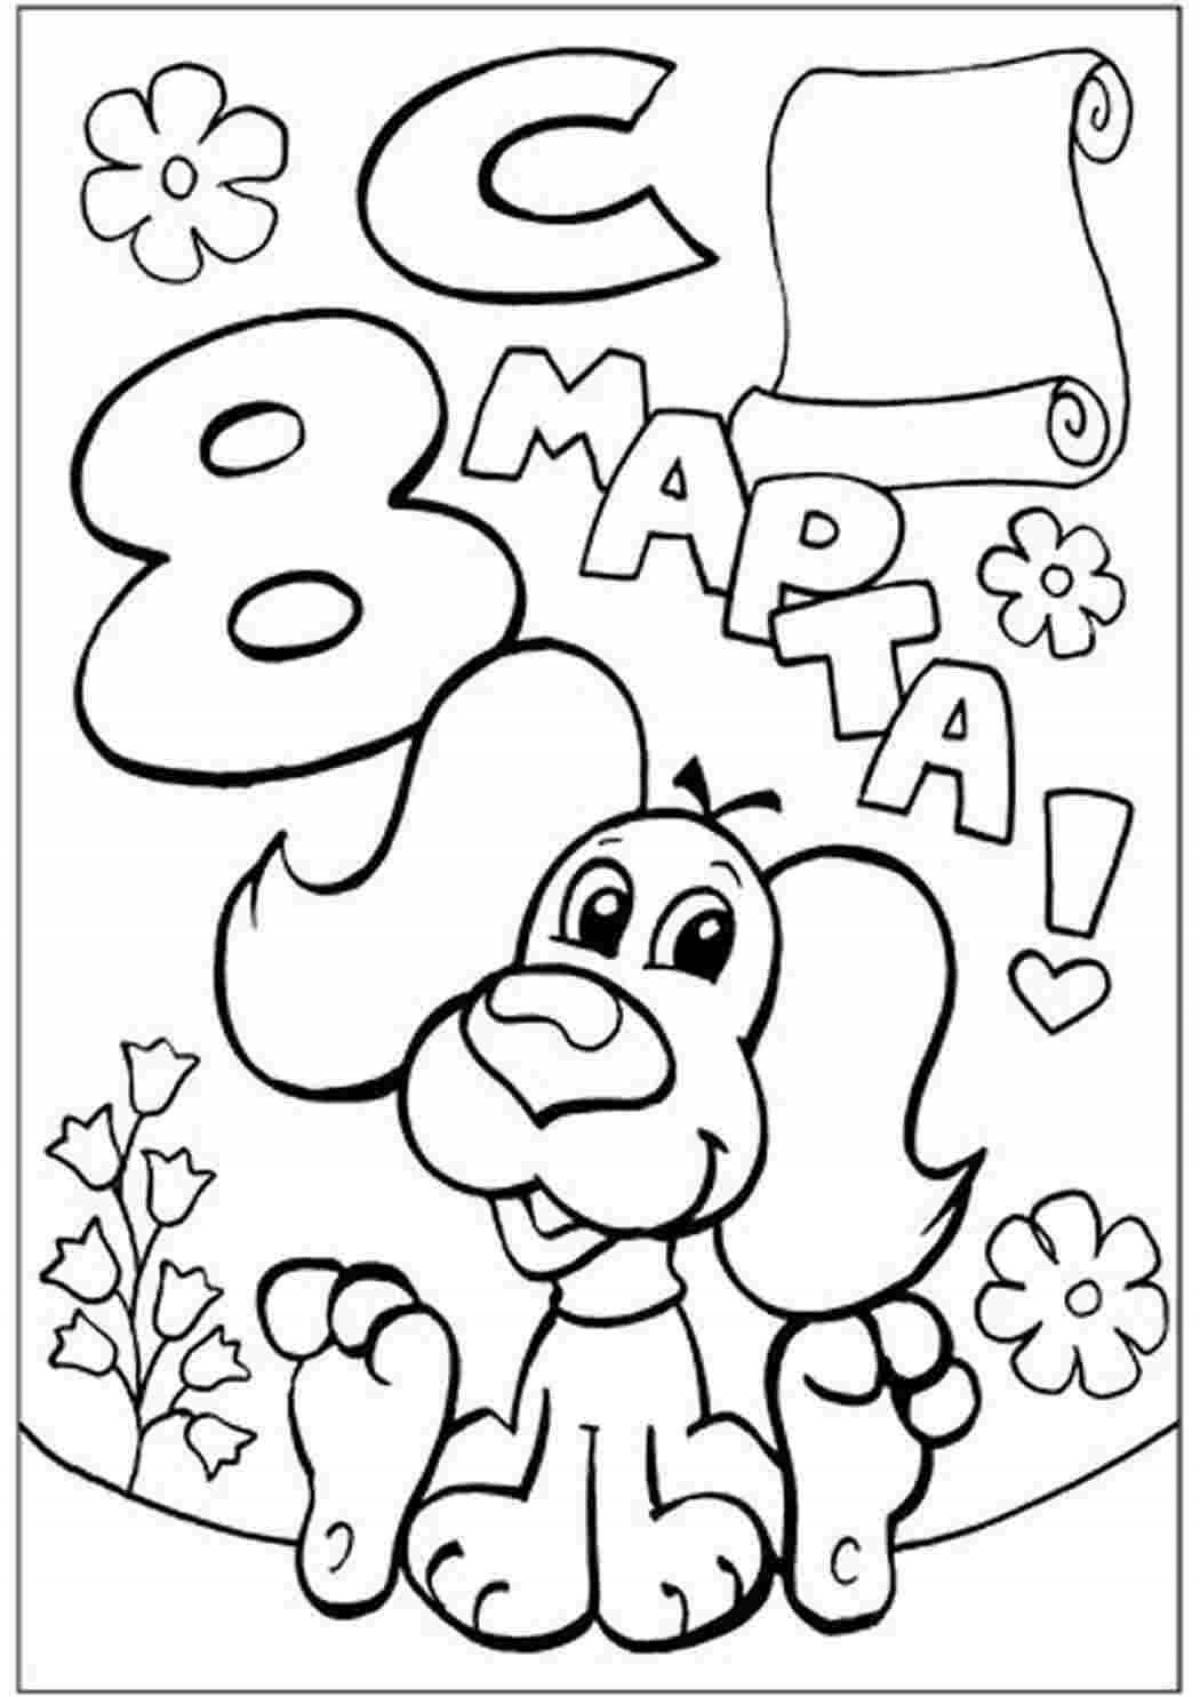 Coloring book magical wall newspaper March 8